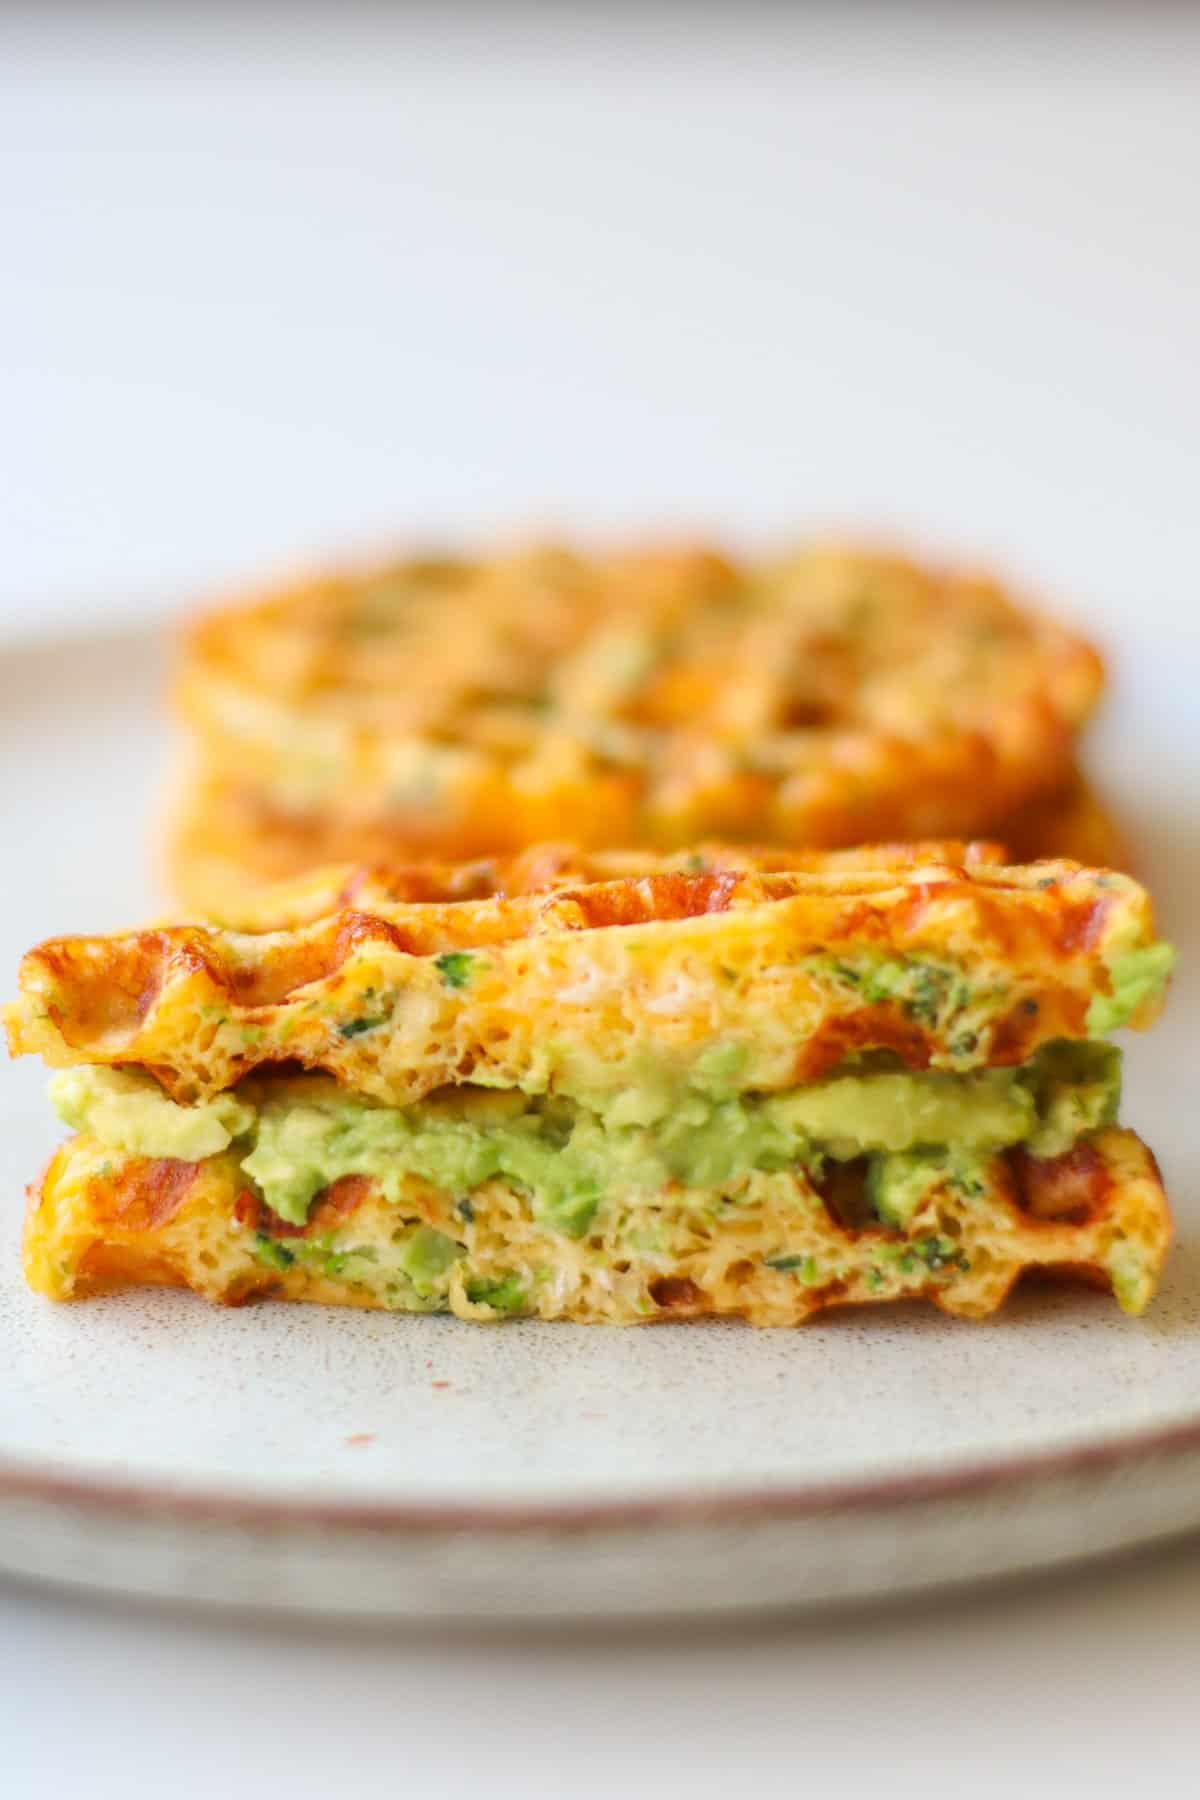 Waffle sandwich with avocado as filling. In the background are two more waffles.